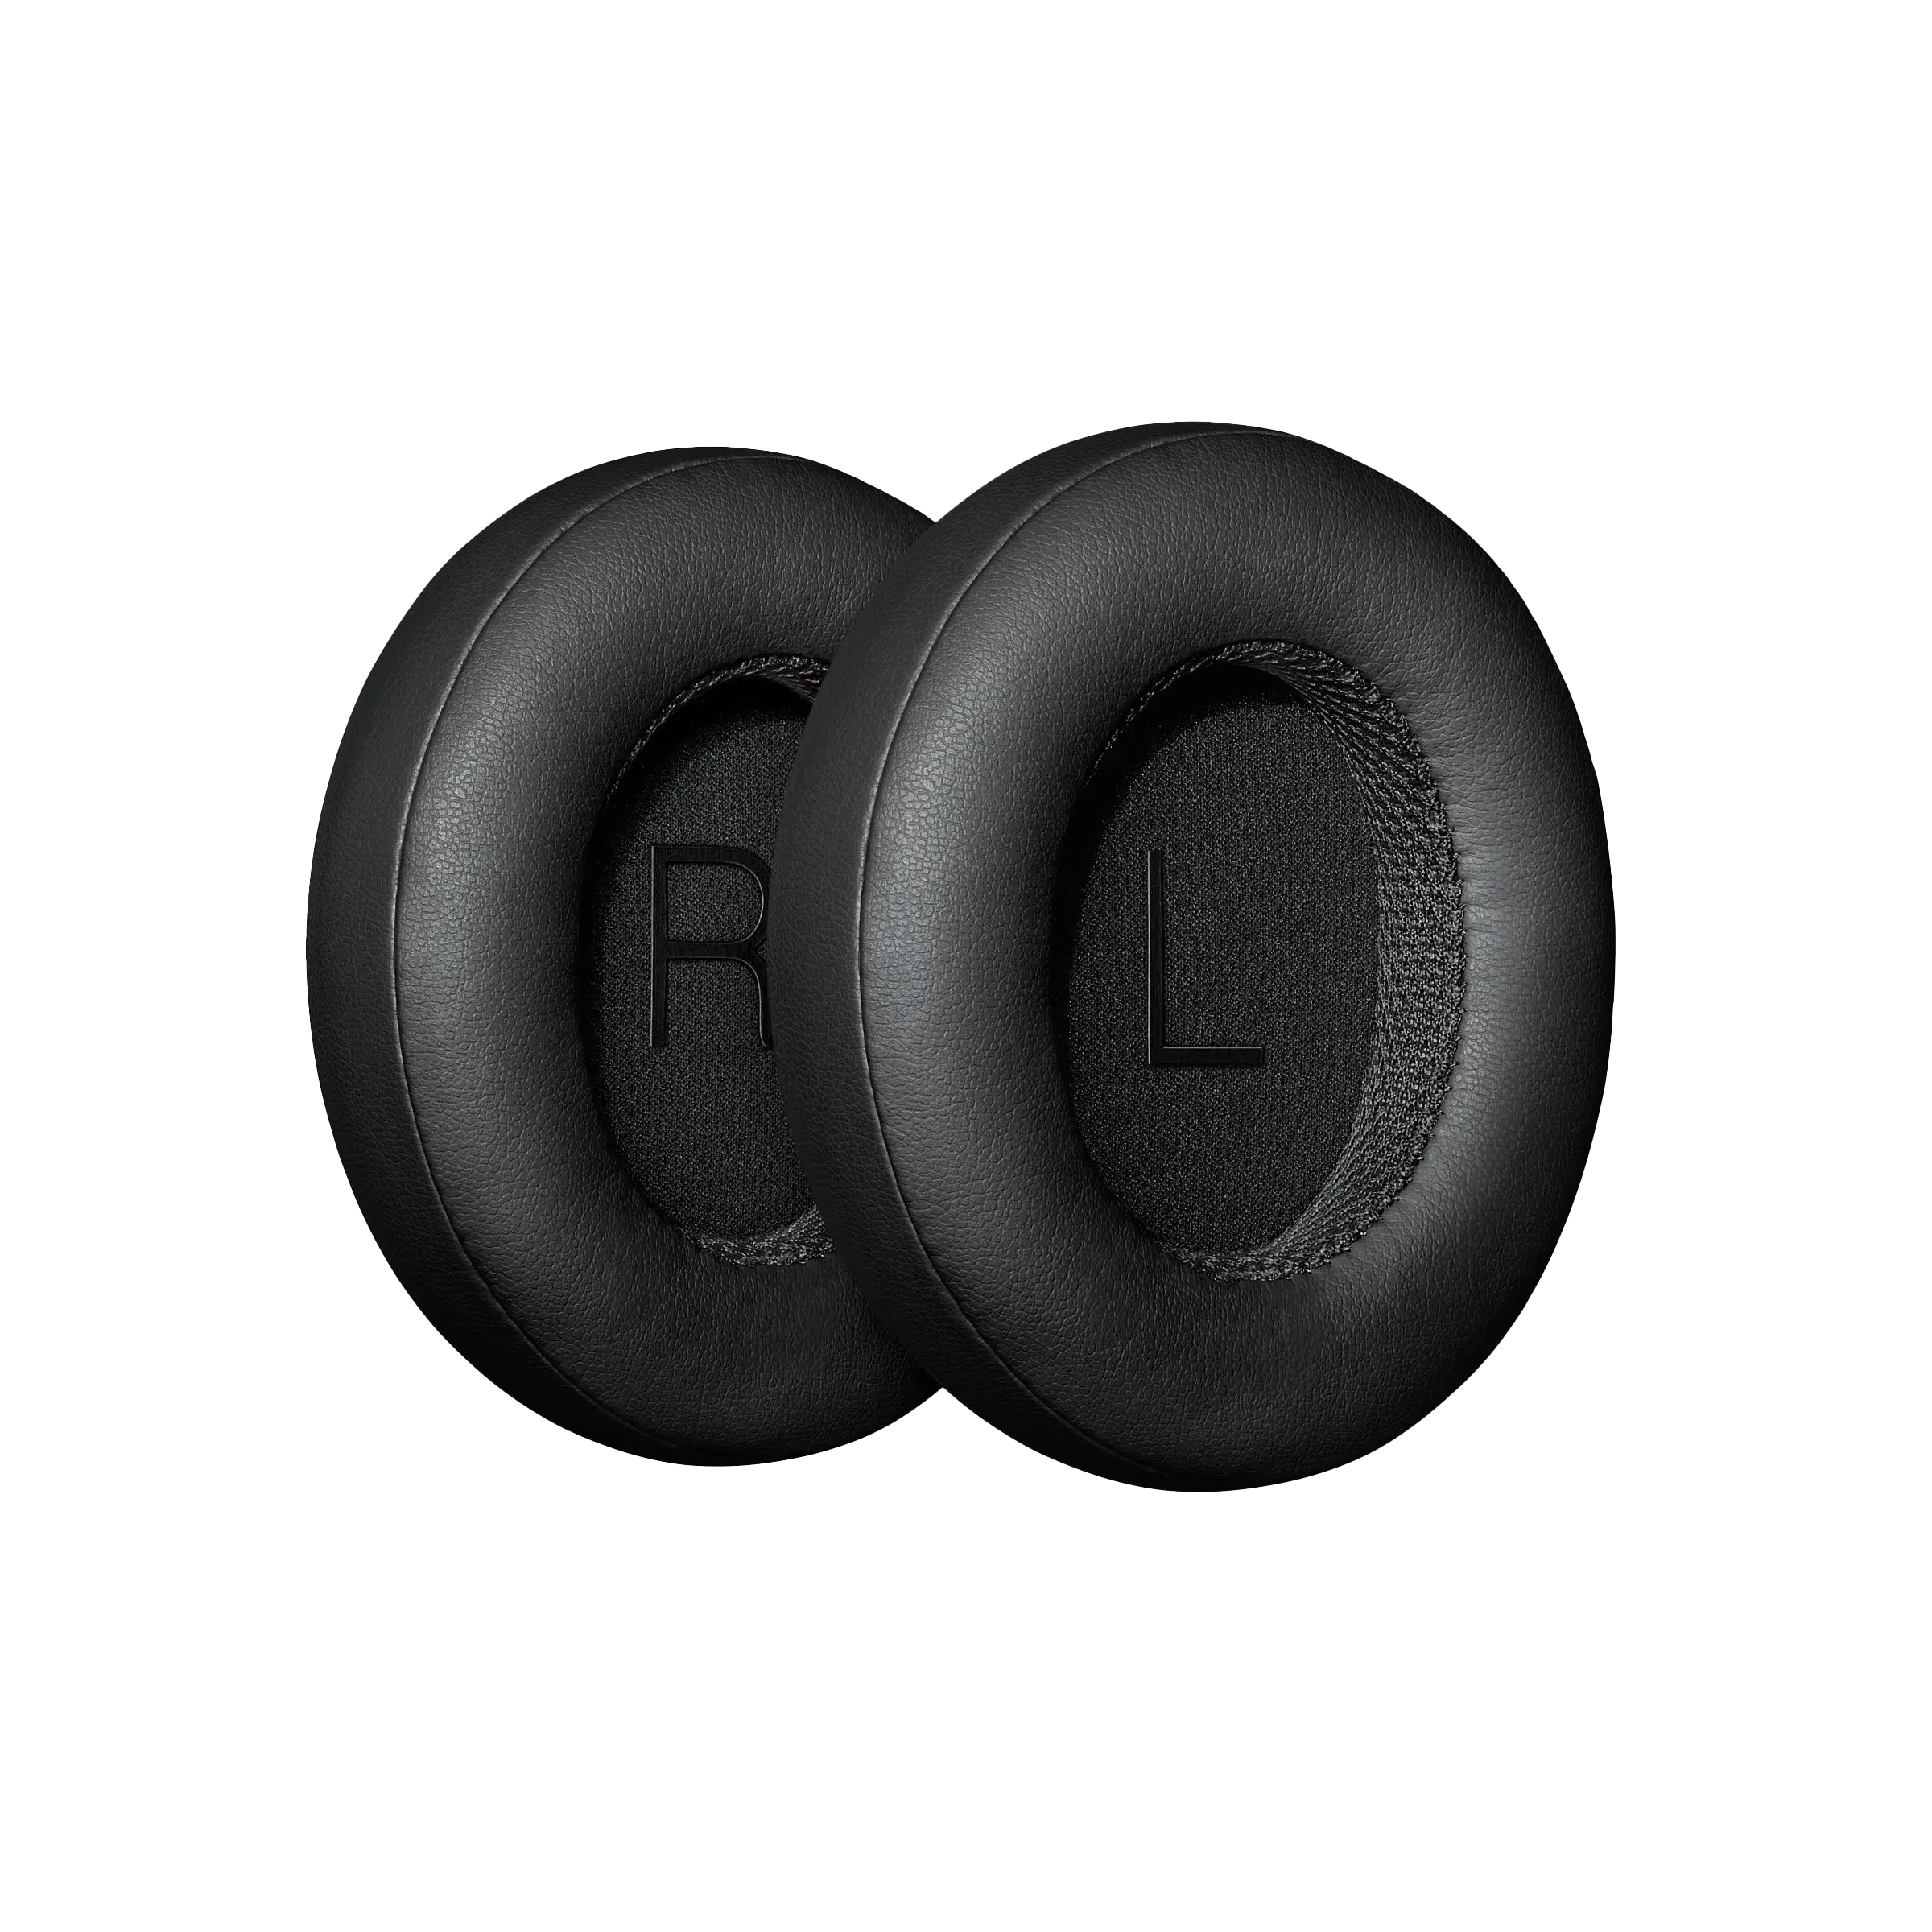 SBH50G2-BK-PADS Replacement Ear Pads, Black